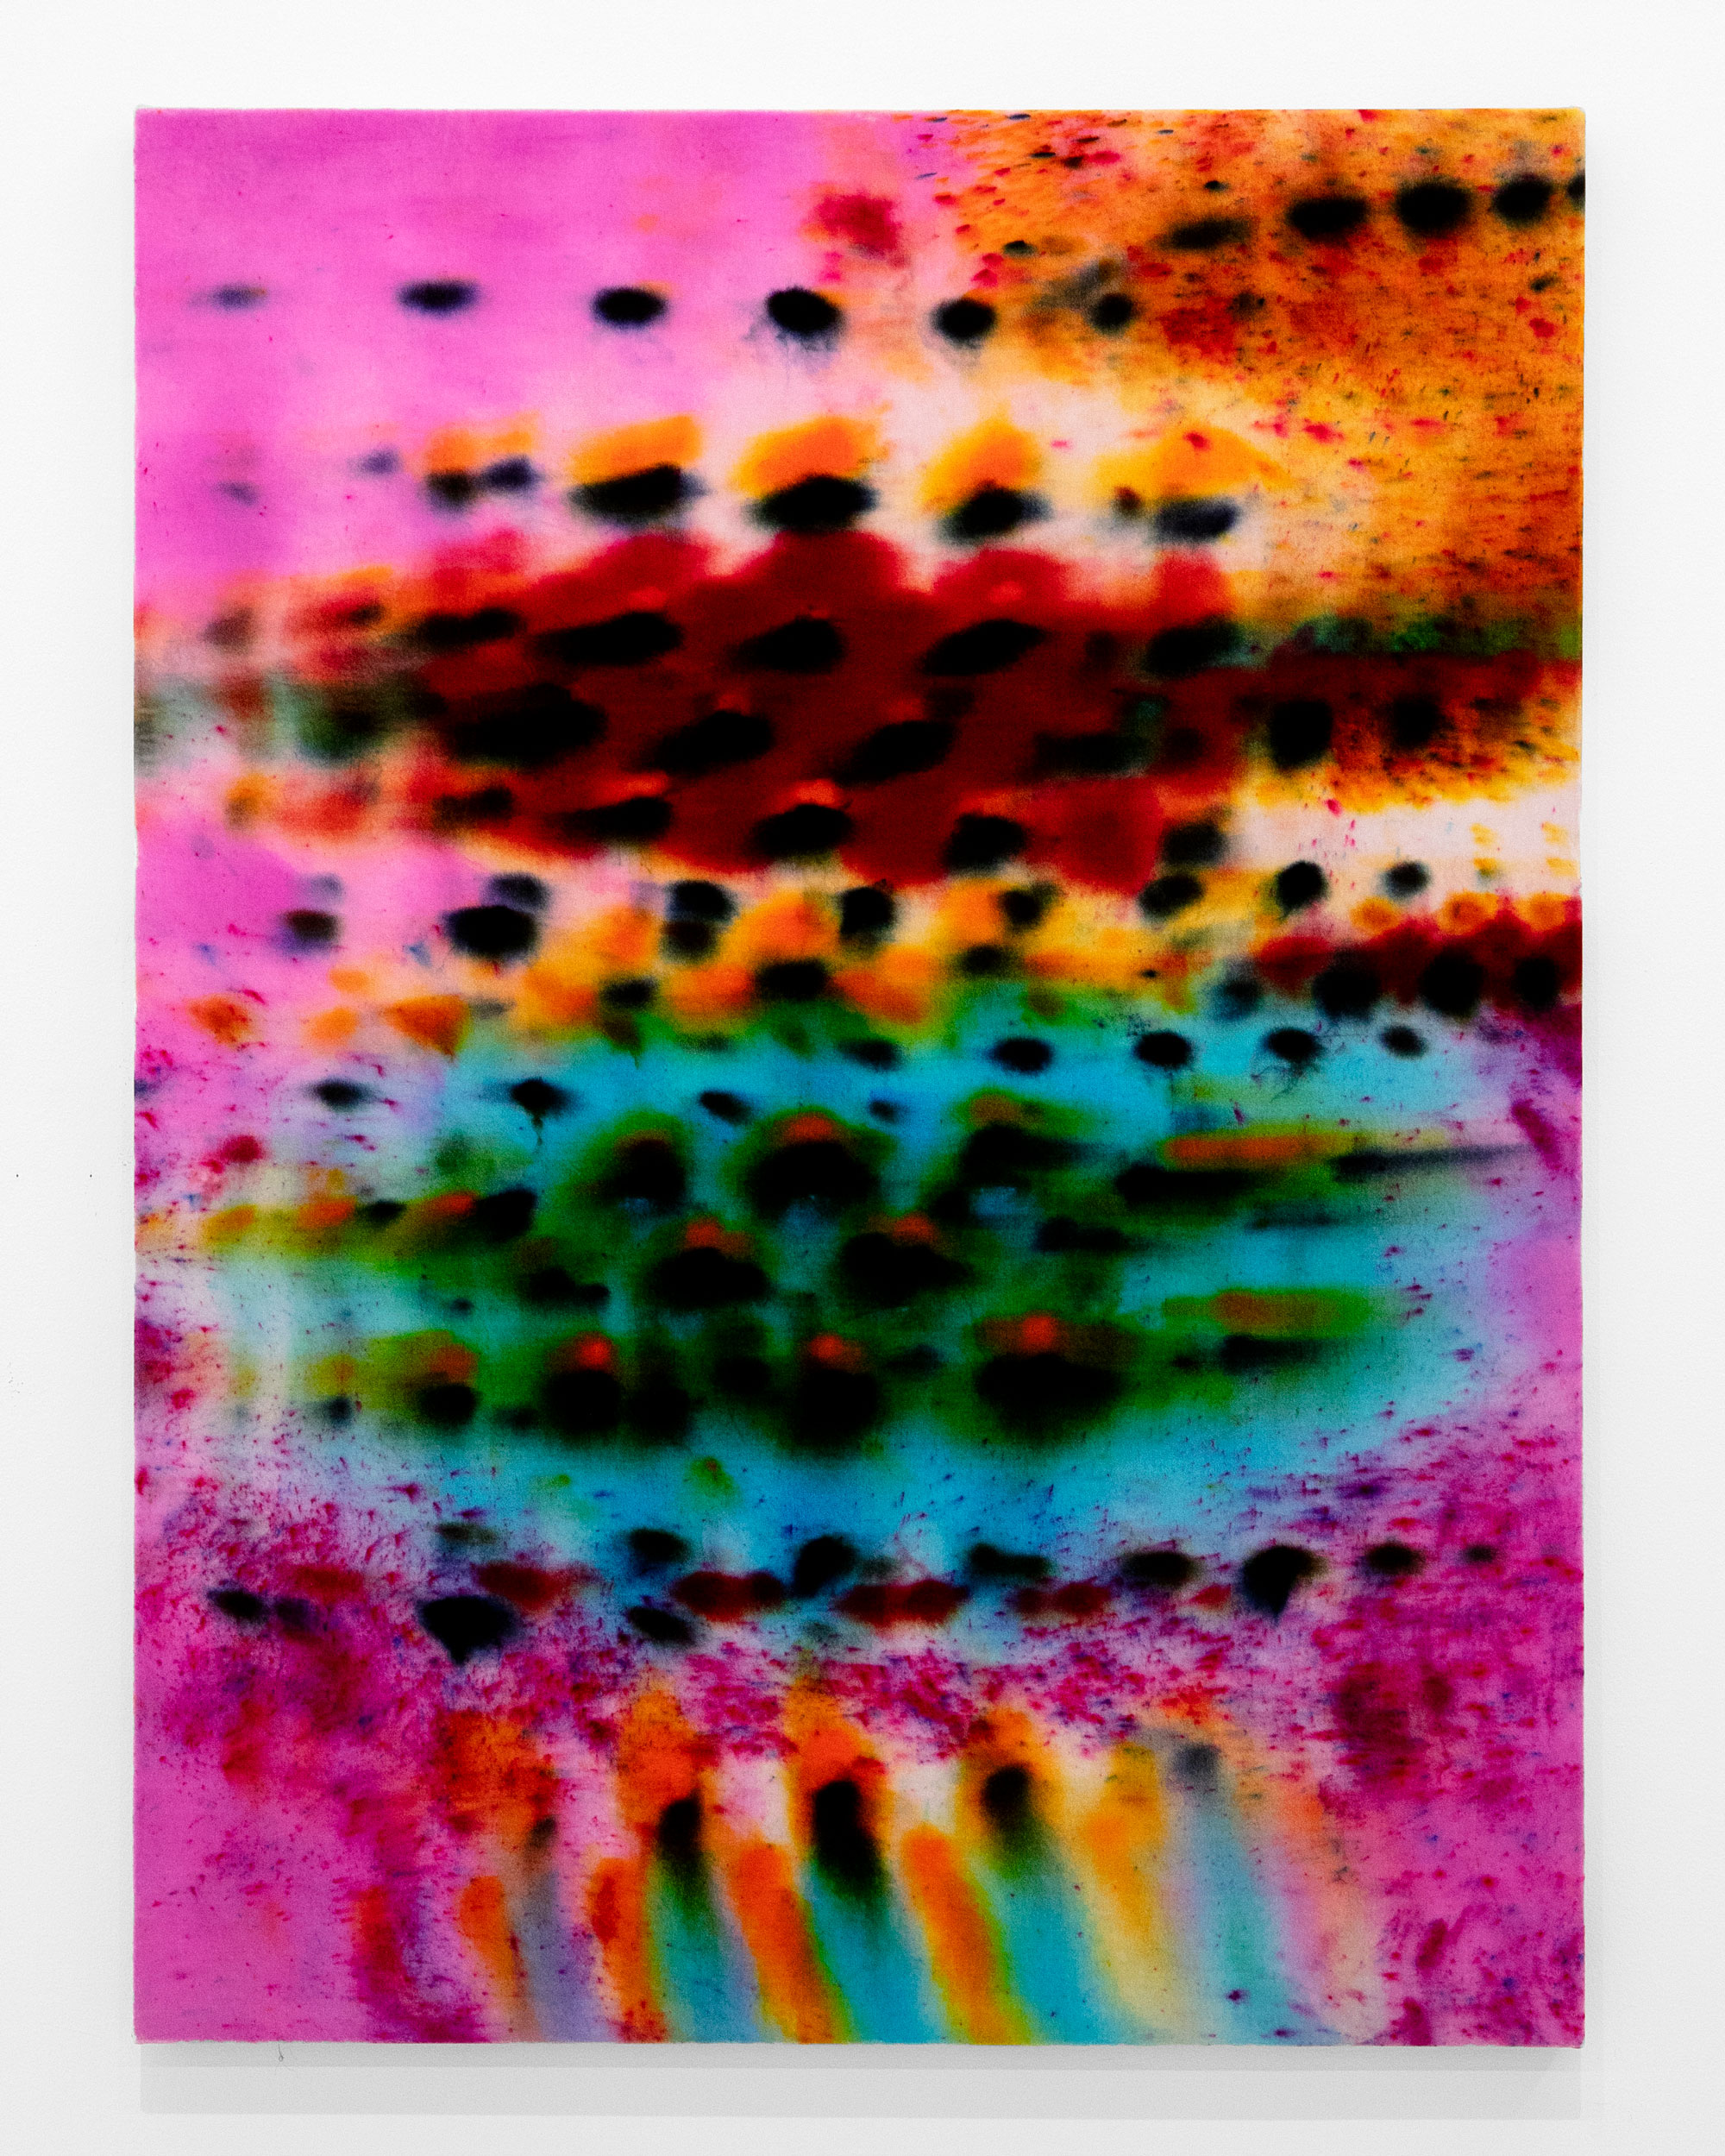 Abstract painting of diffuse, blurry dots with bright colors of pink, teal and yellow